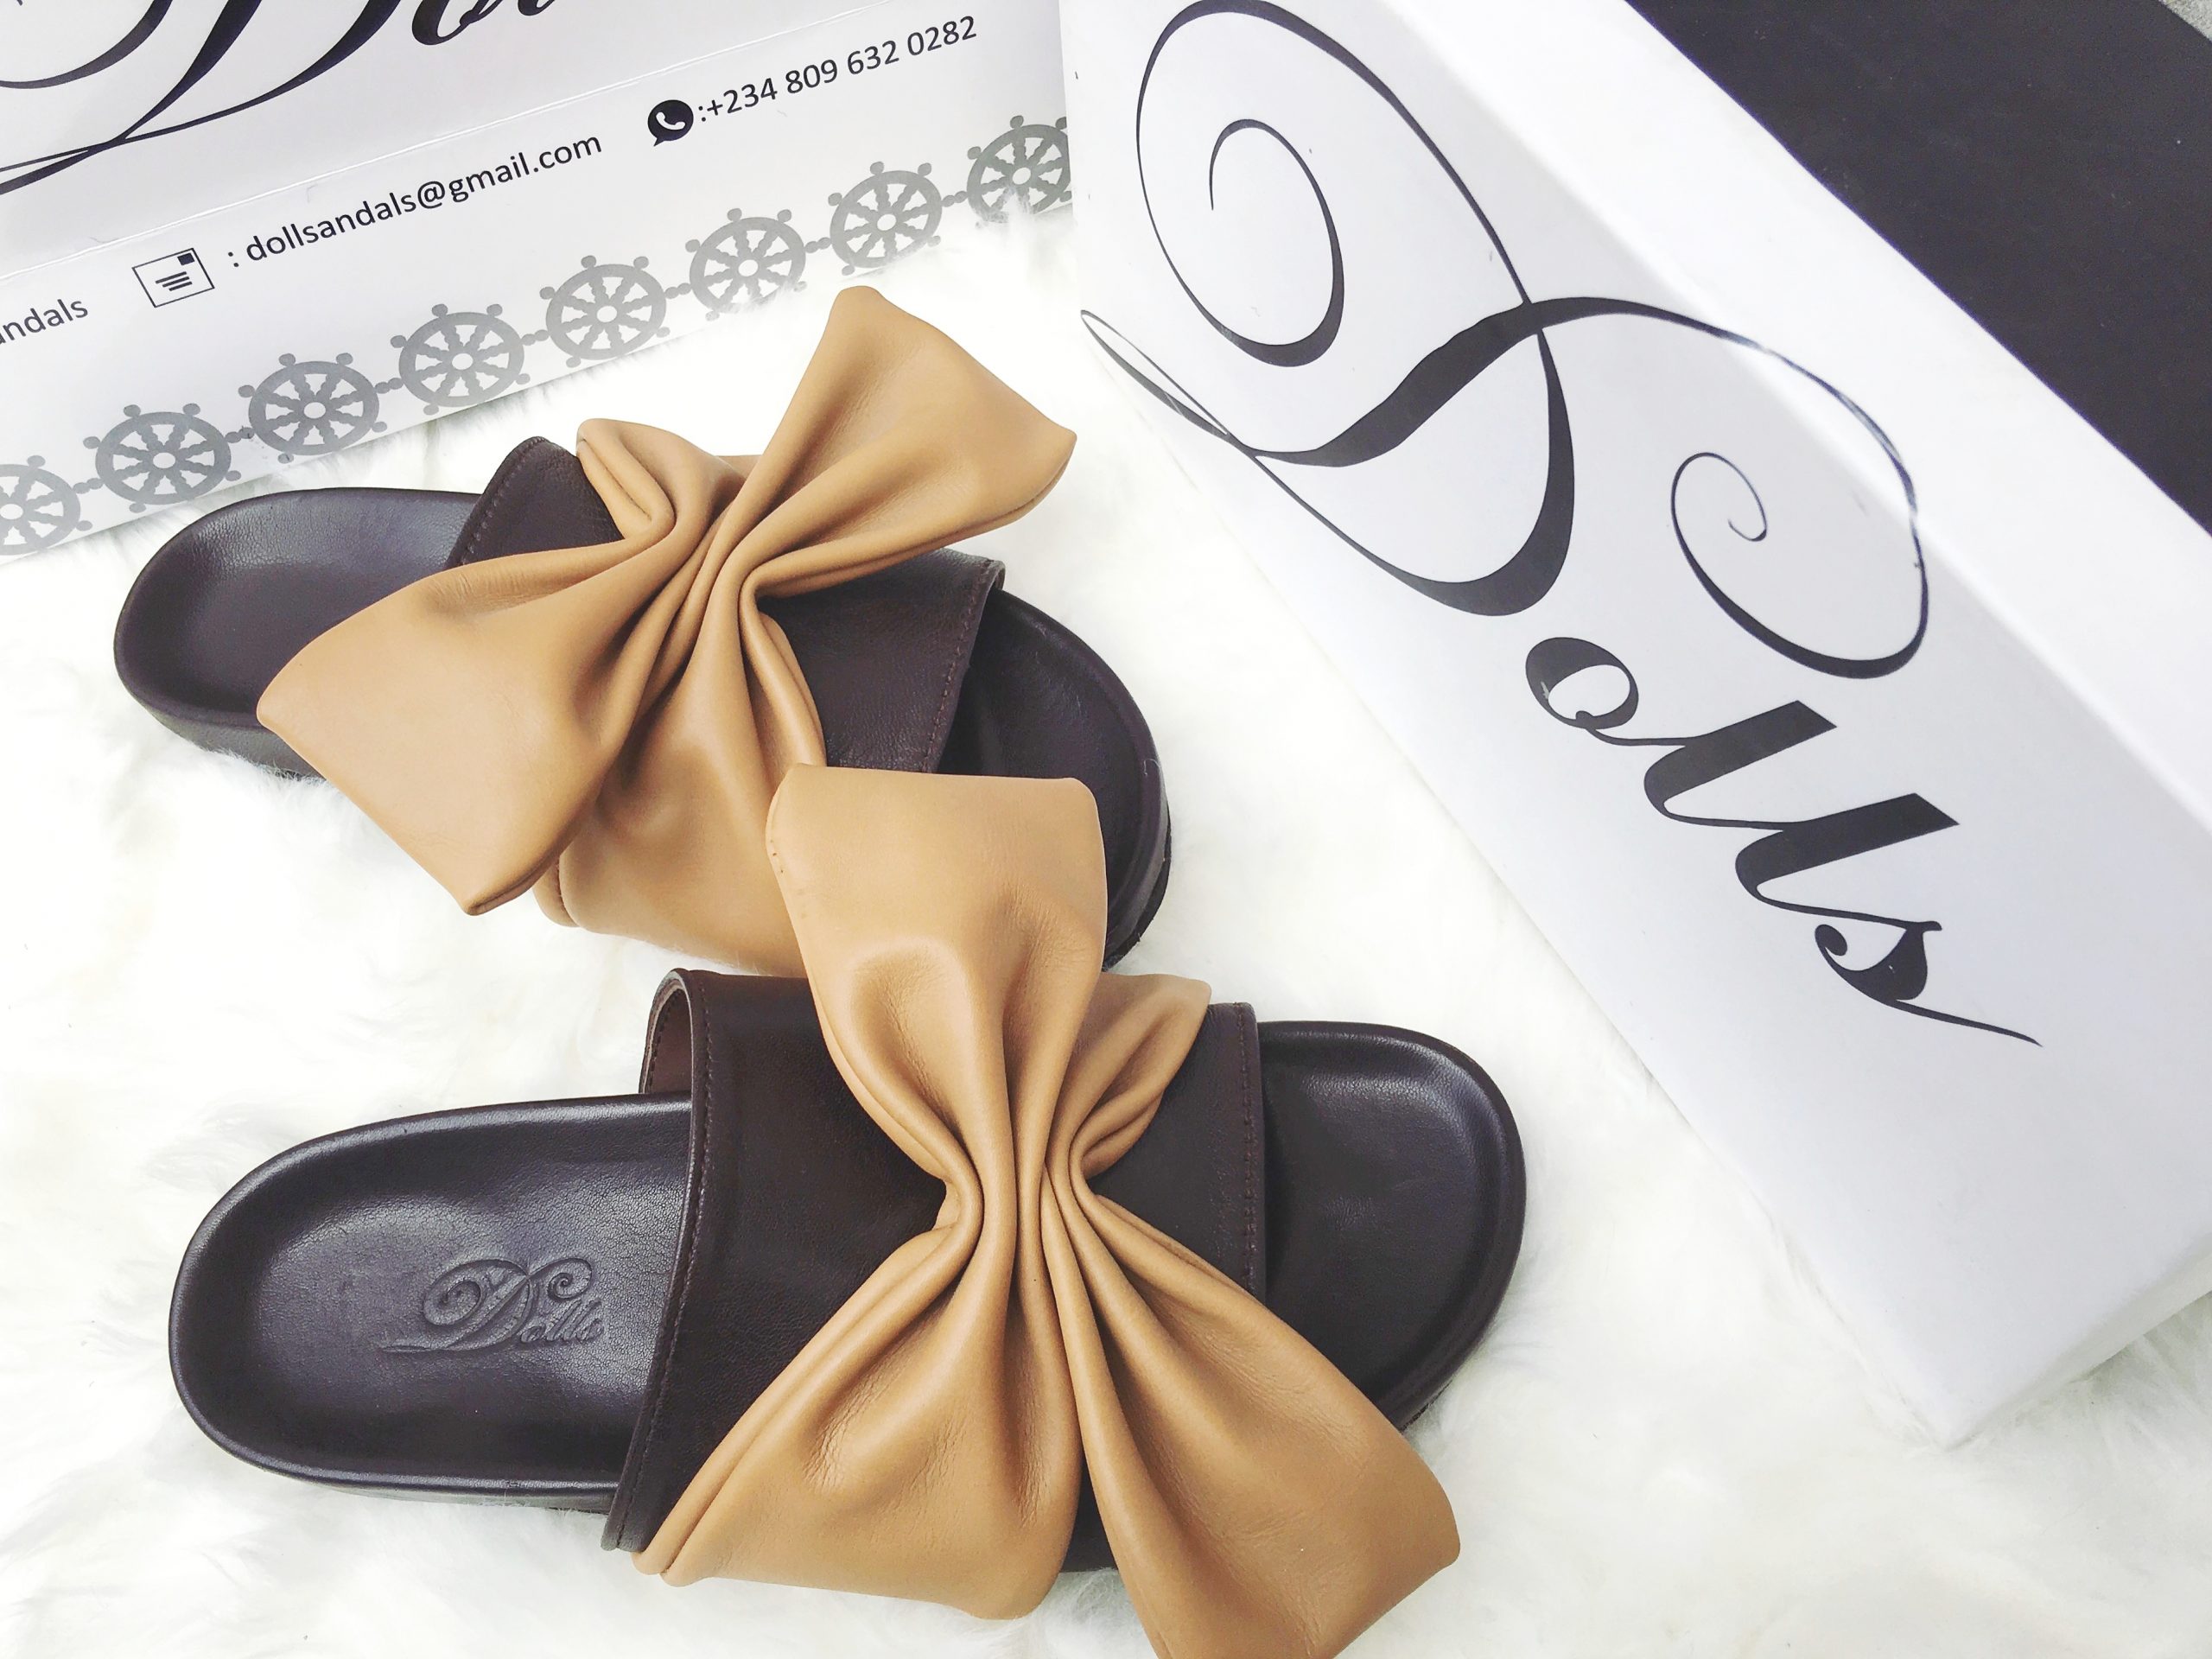 Picture of a pair of slides for women by Dolls leather products